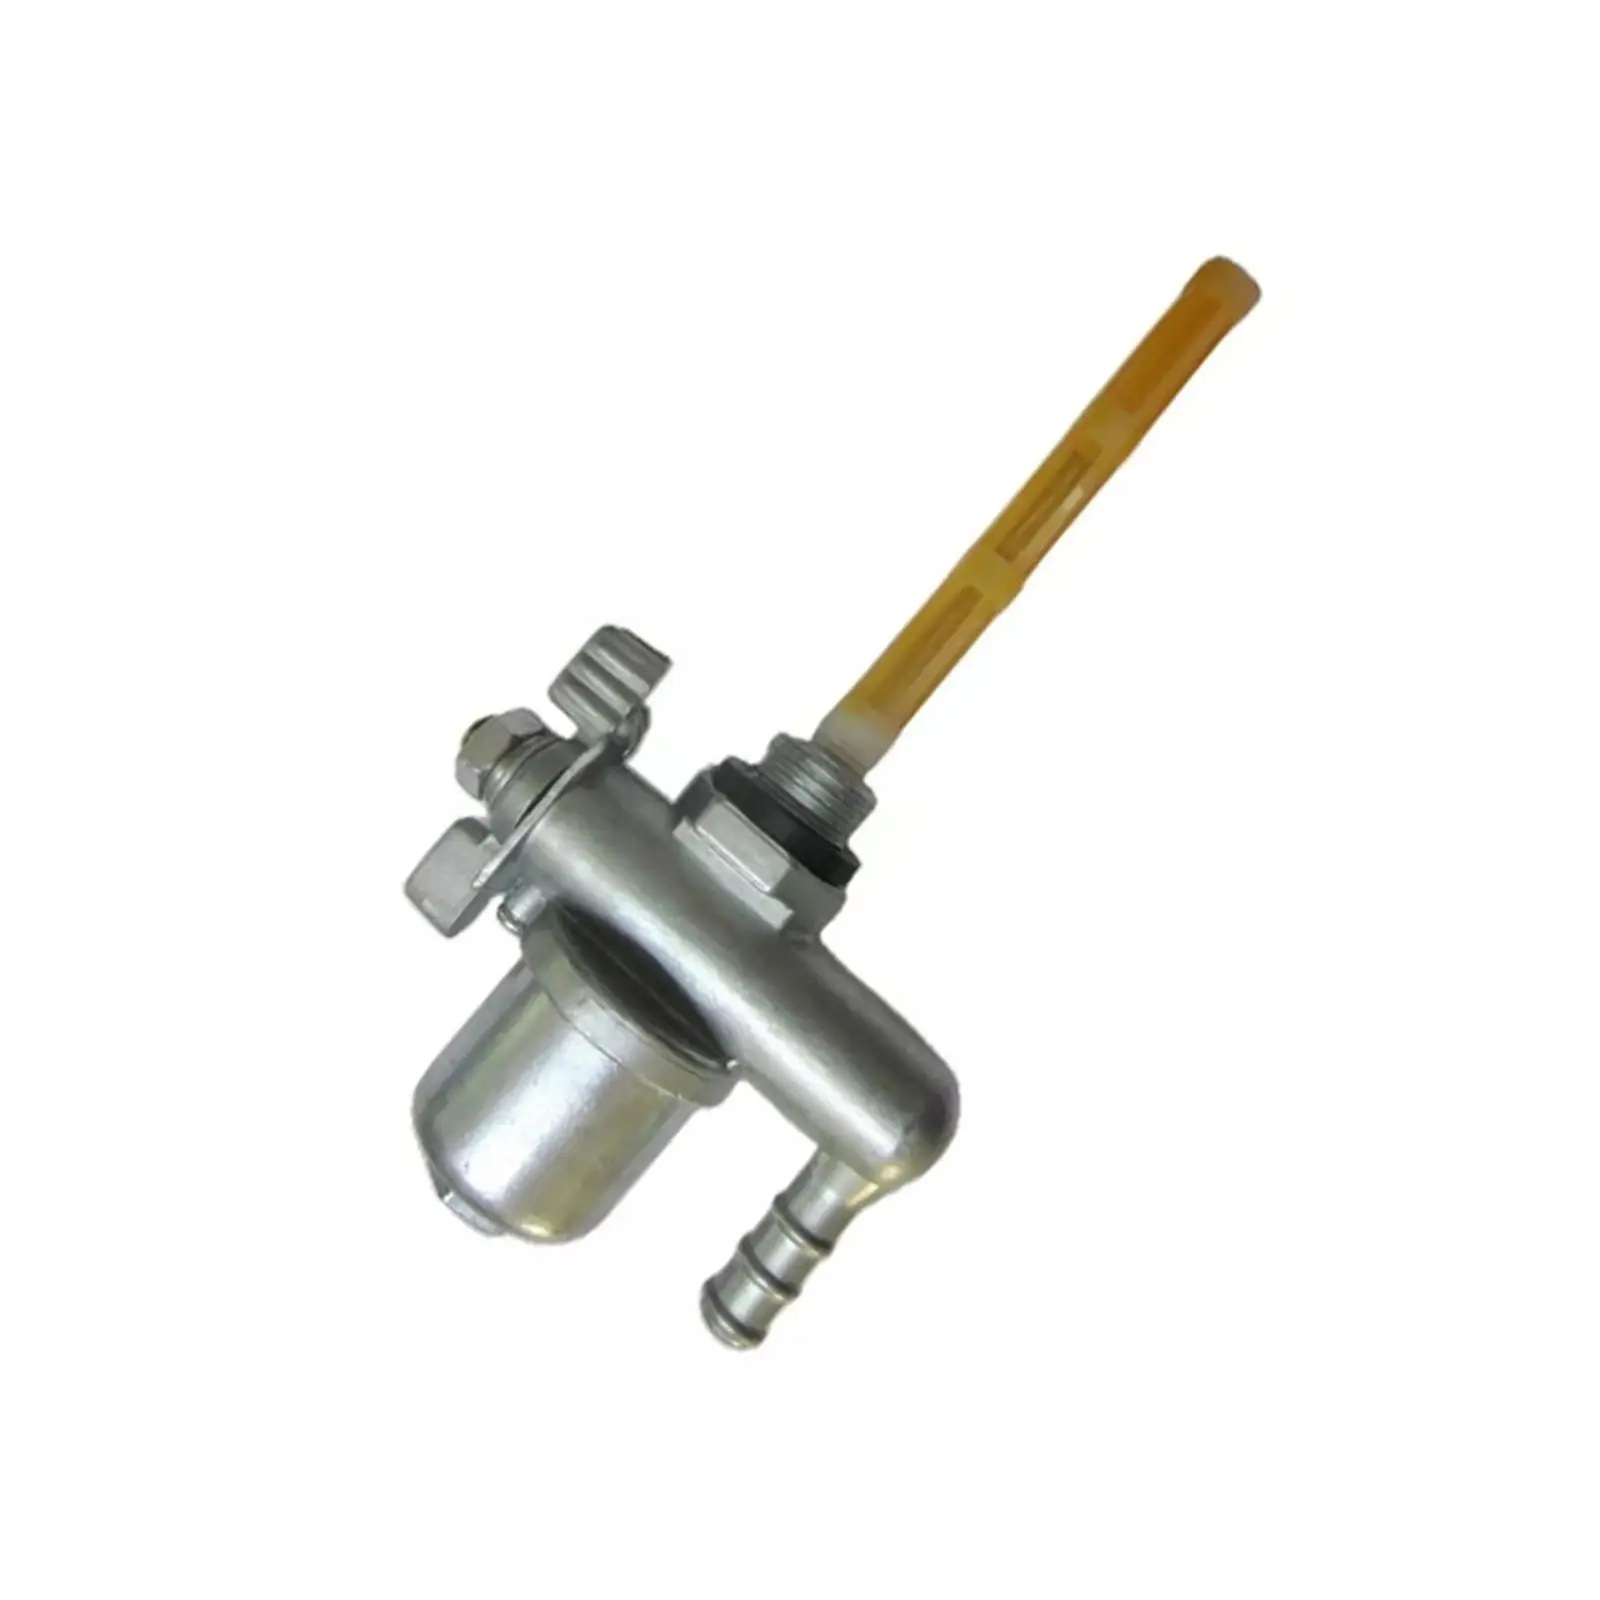 Motorcycle Fuel Tank Switch Valve Petcock Replacement Fit for Ruassia Msk